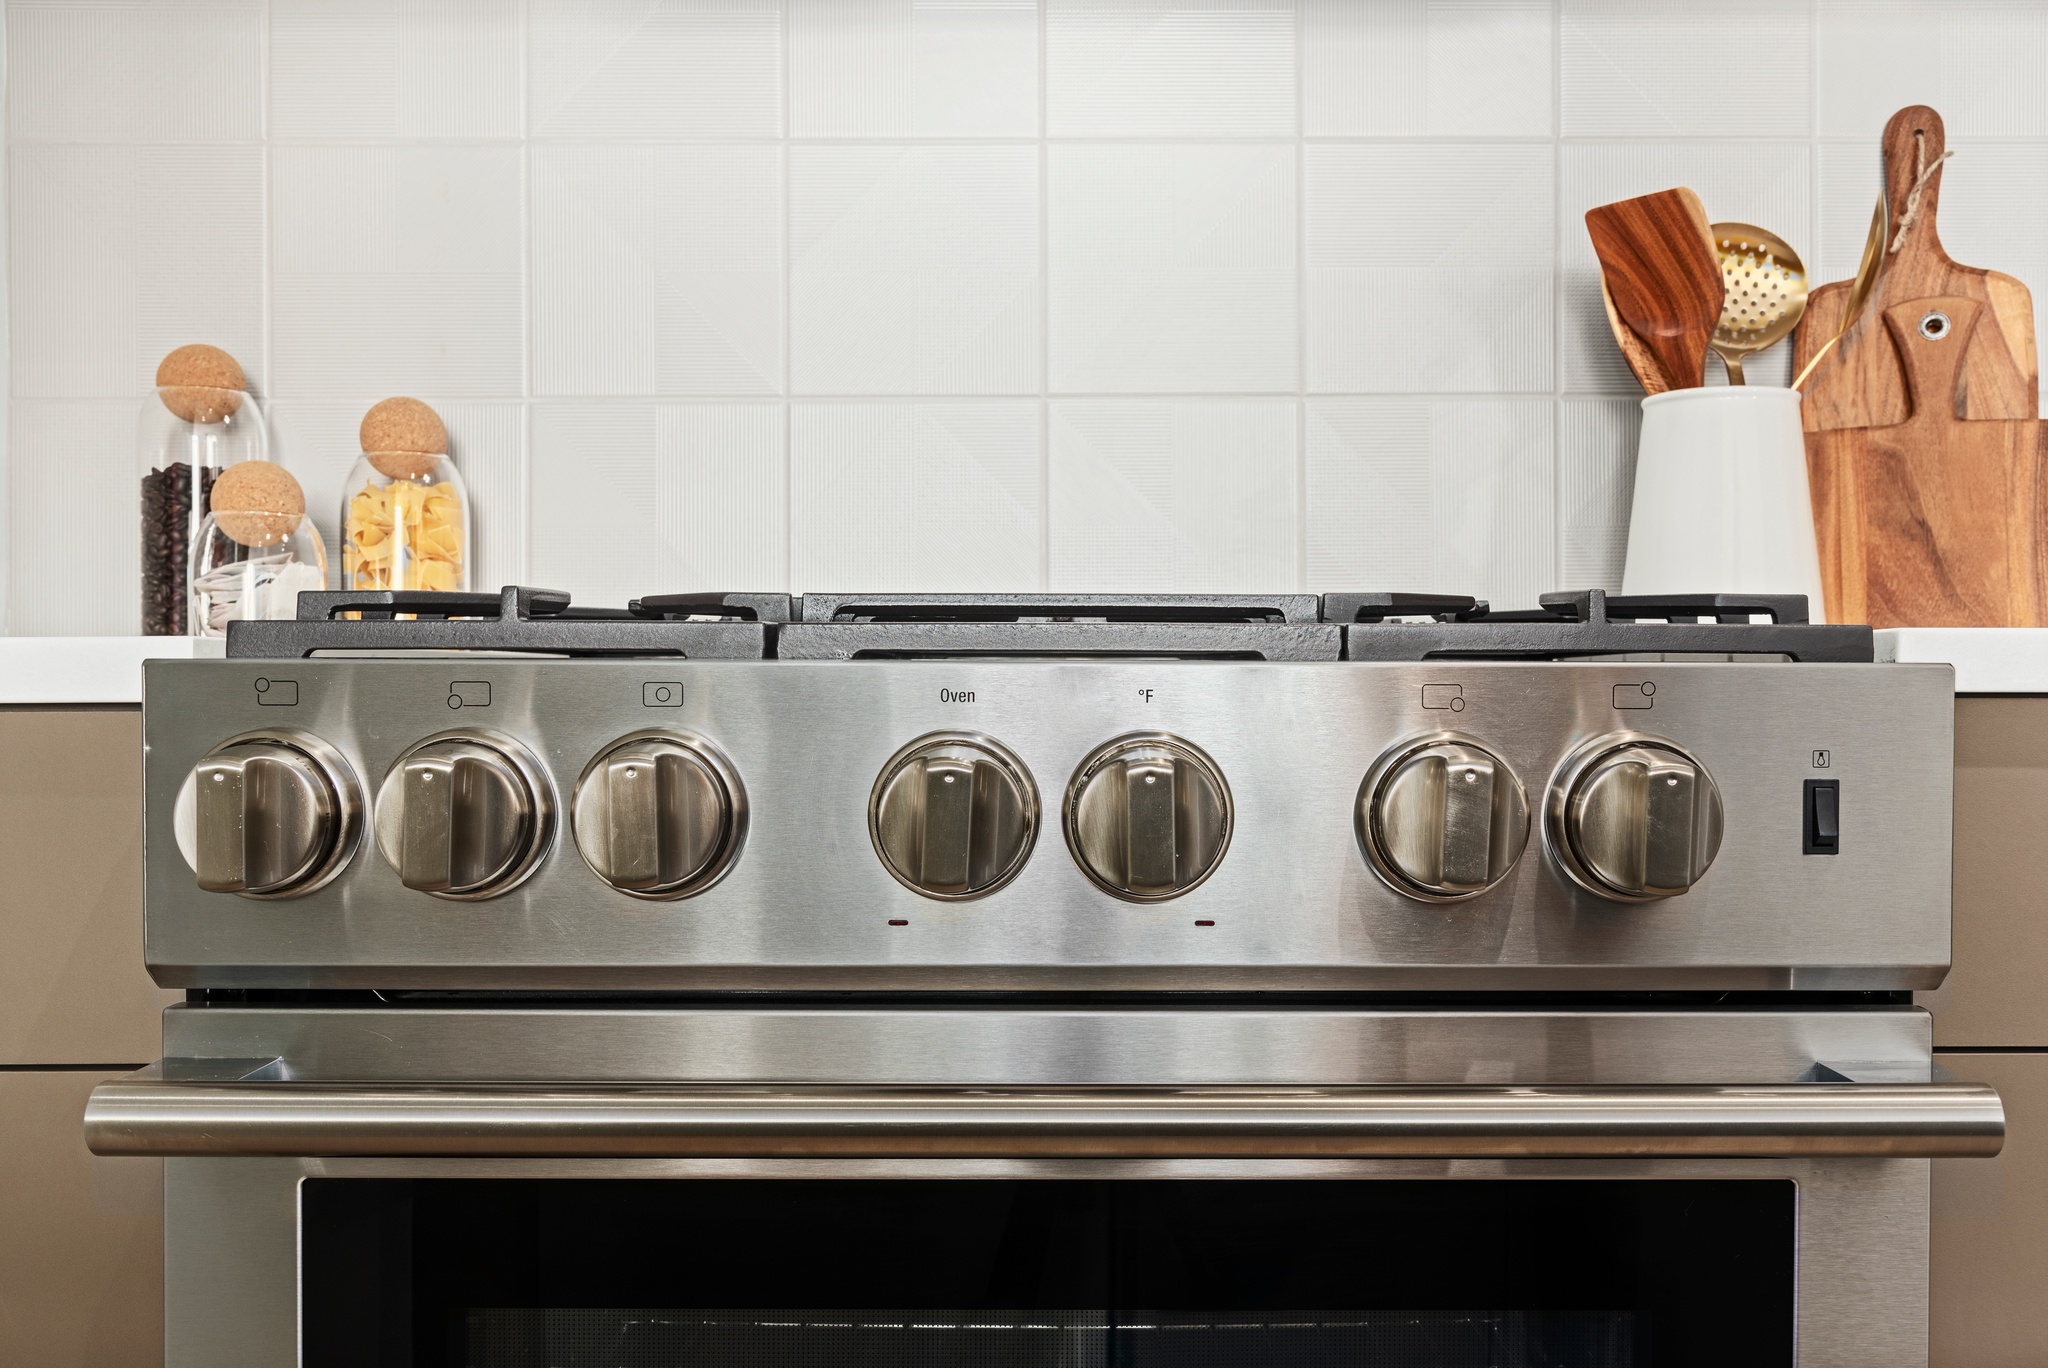 Detail of stainless steel stove oven knobs with white tile backsplash